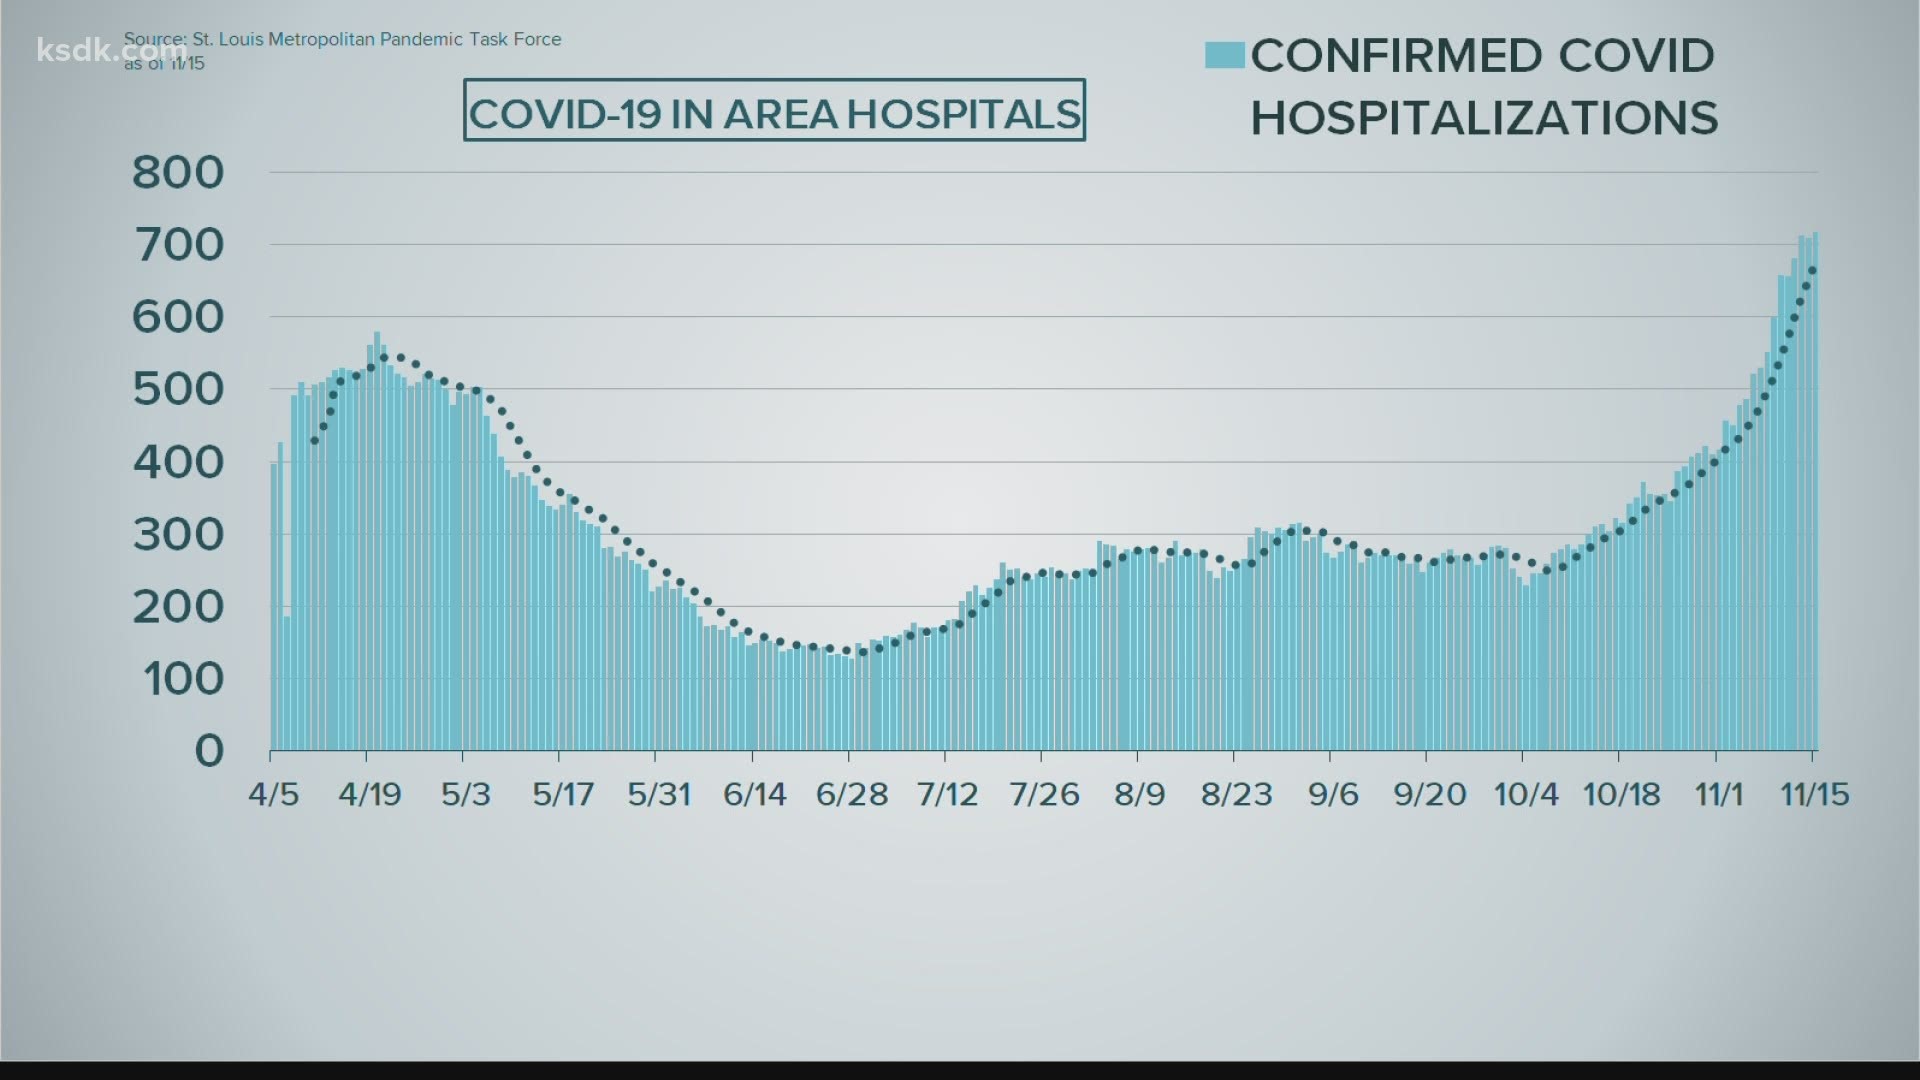 Hospitalizations continue to remain high due to the coronavirus